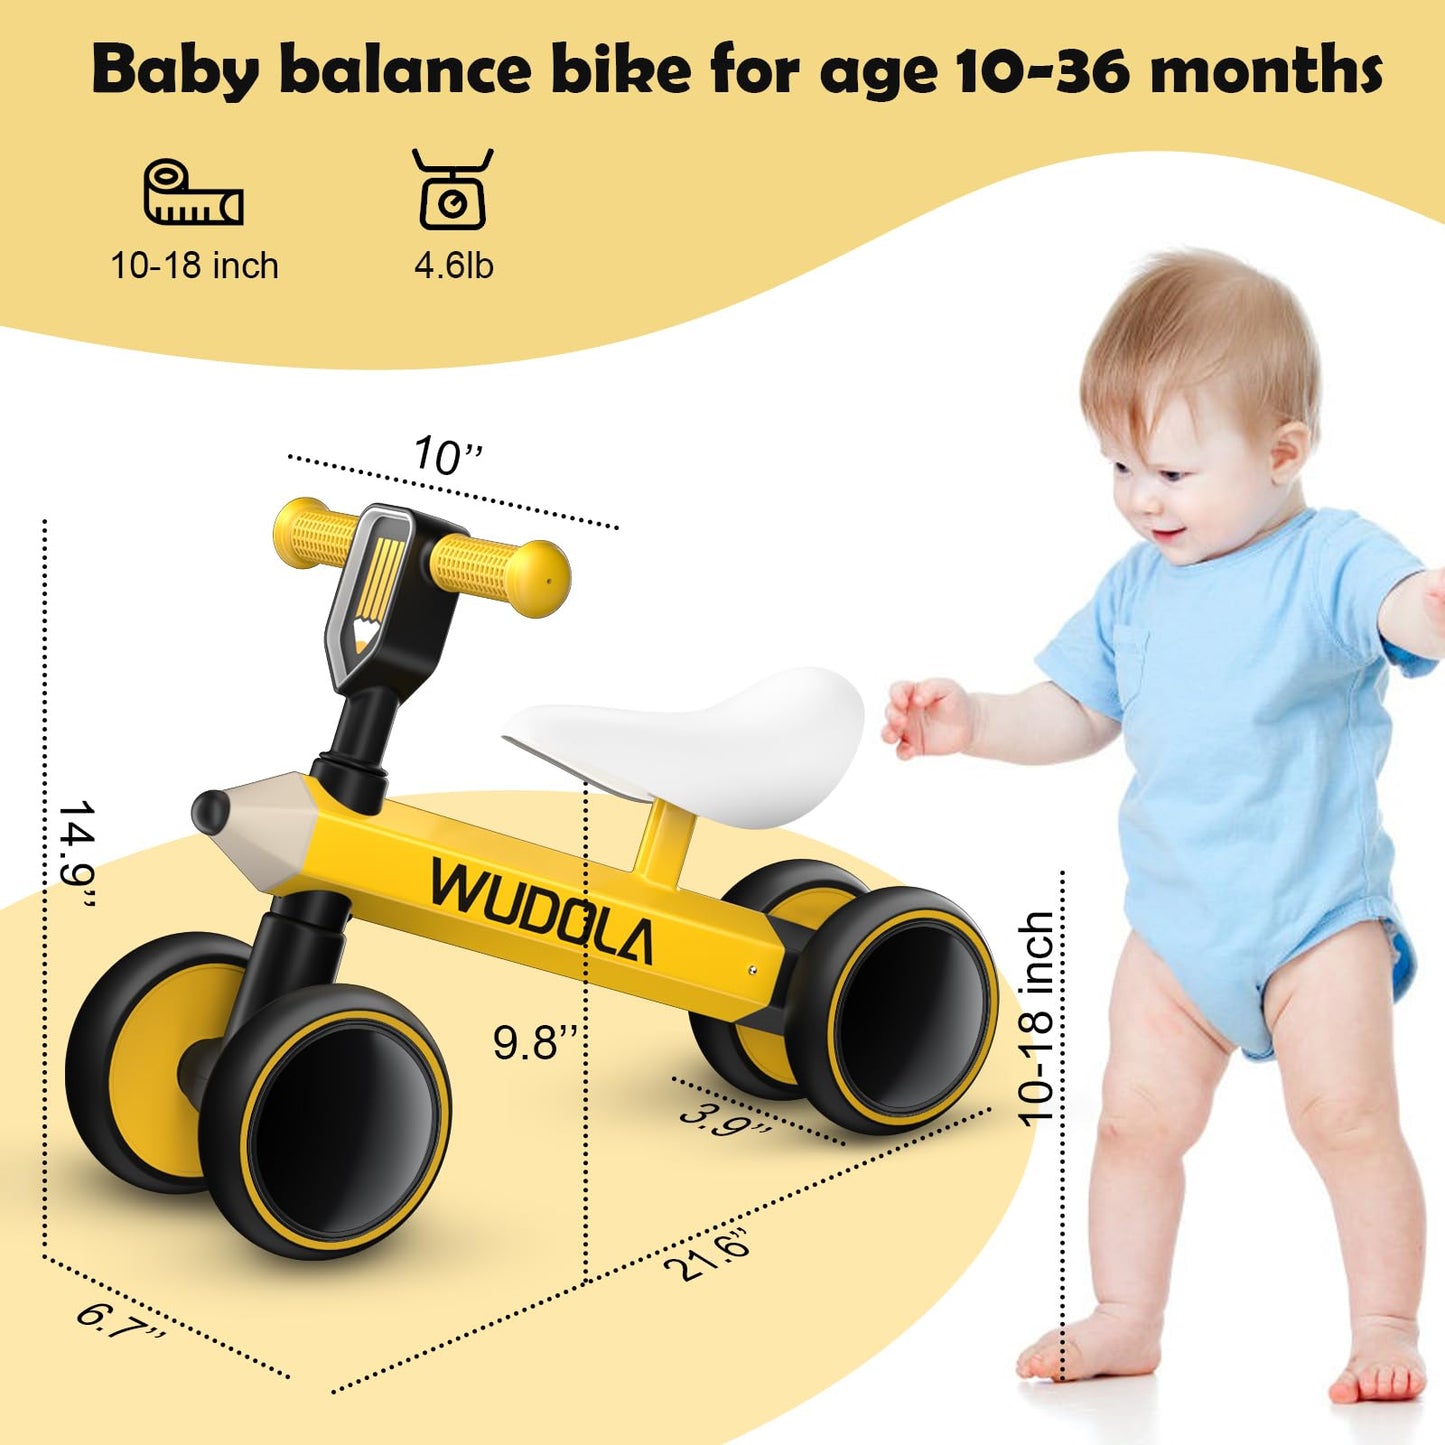 Baby Balance Bike Toys for 1 Year Old, Pre-School First Bike and 1st Birthday Gifts, Silent Wheels & Non-Pedal Baby Walker Riding Toys for 10-36 Months Toddlers, Yellow